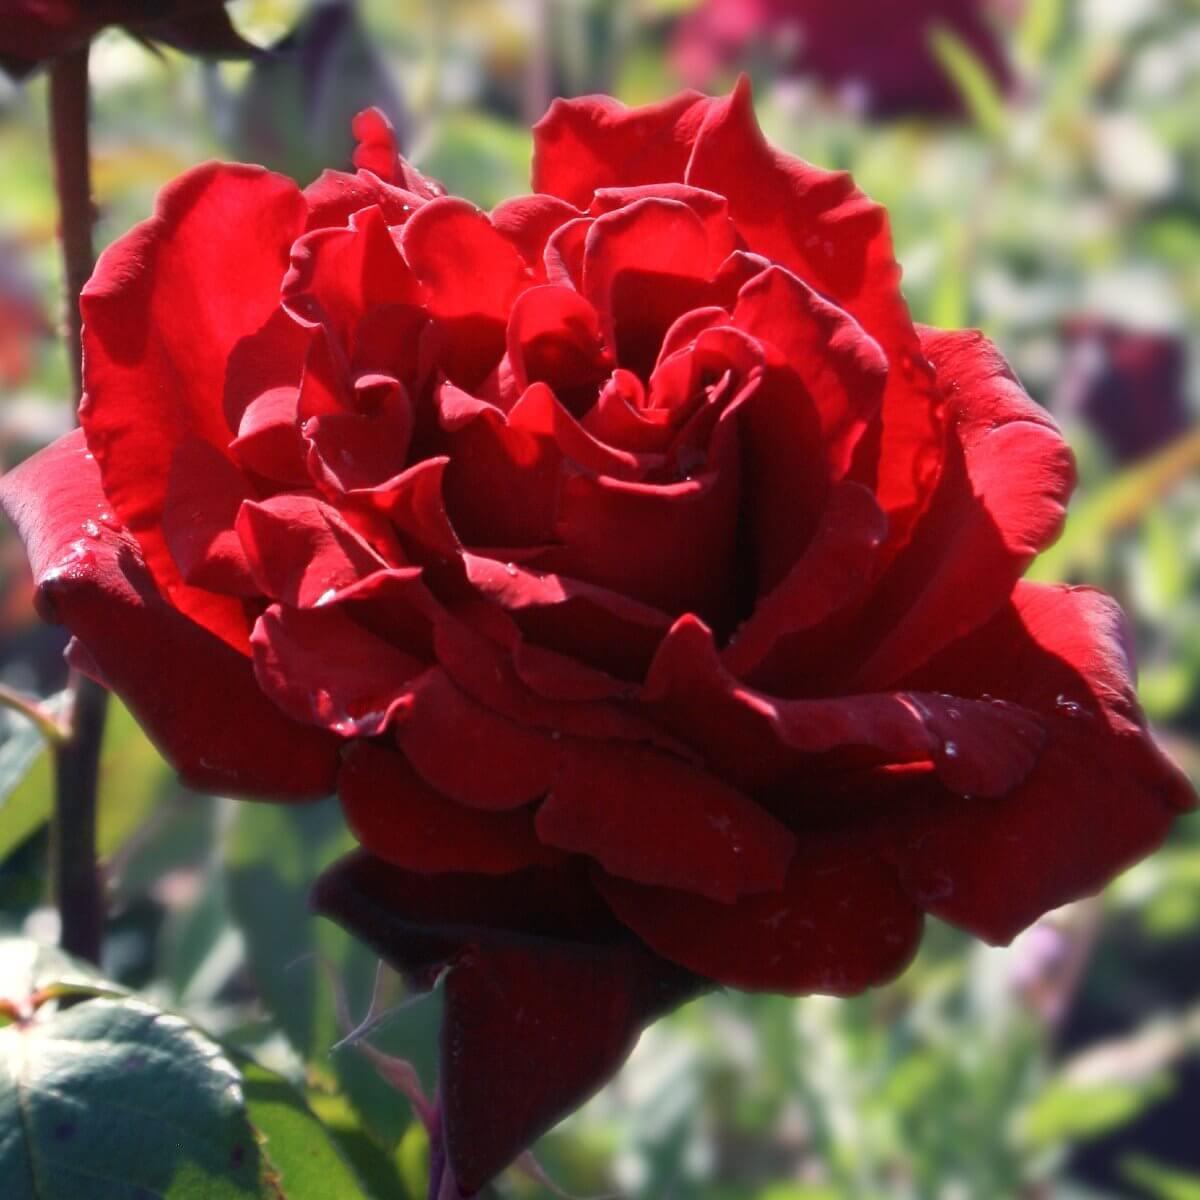 Royal William Colour Red  Good Fragrance Rose Of The YearRose Of The Year Winners  Hybrid Tea